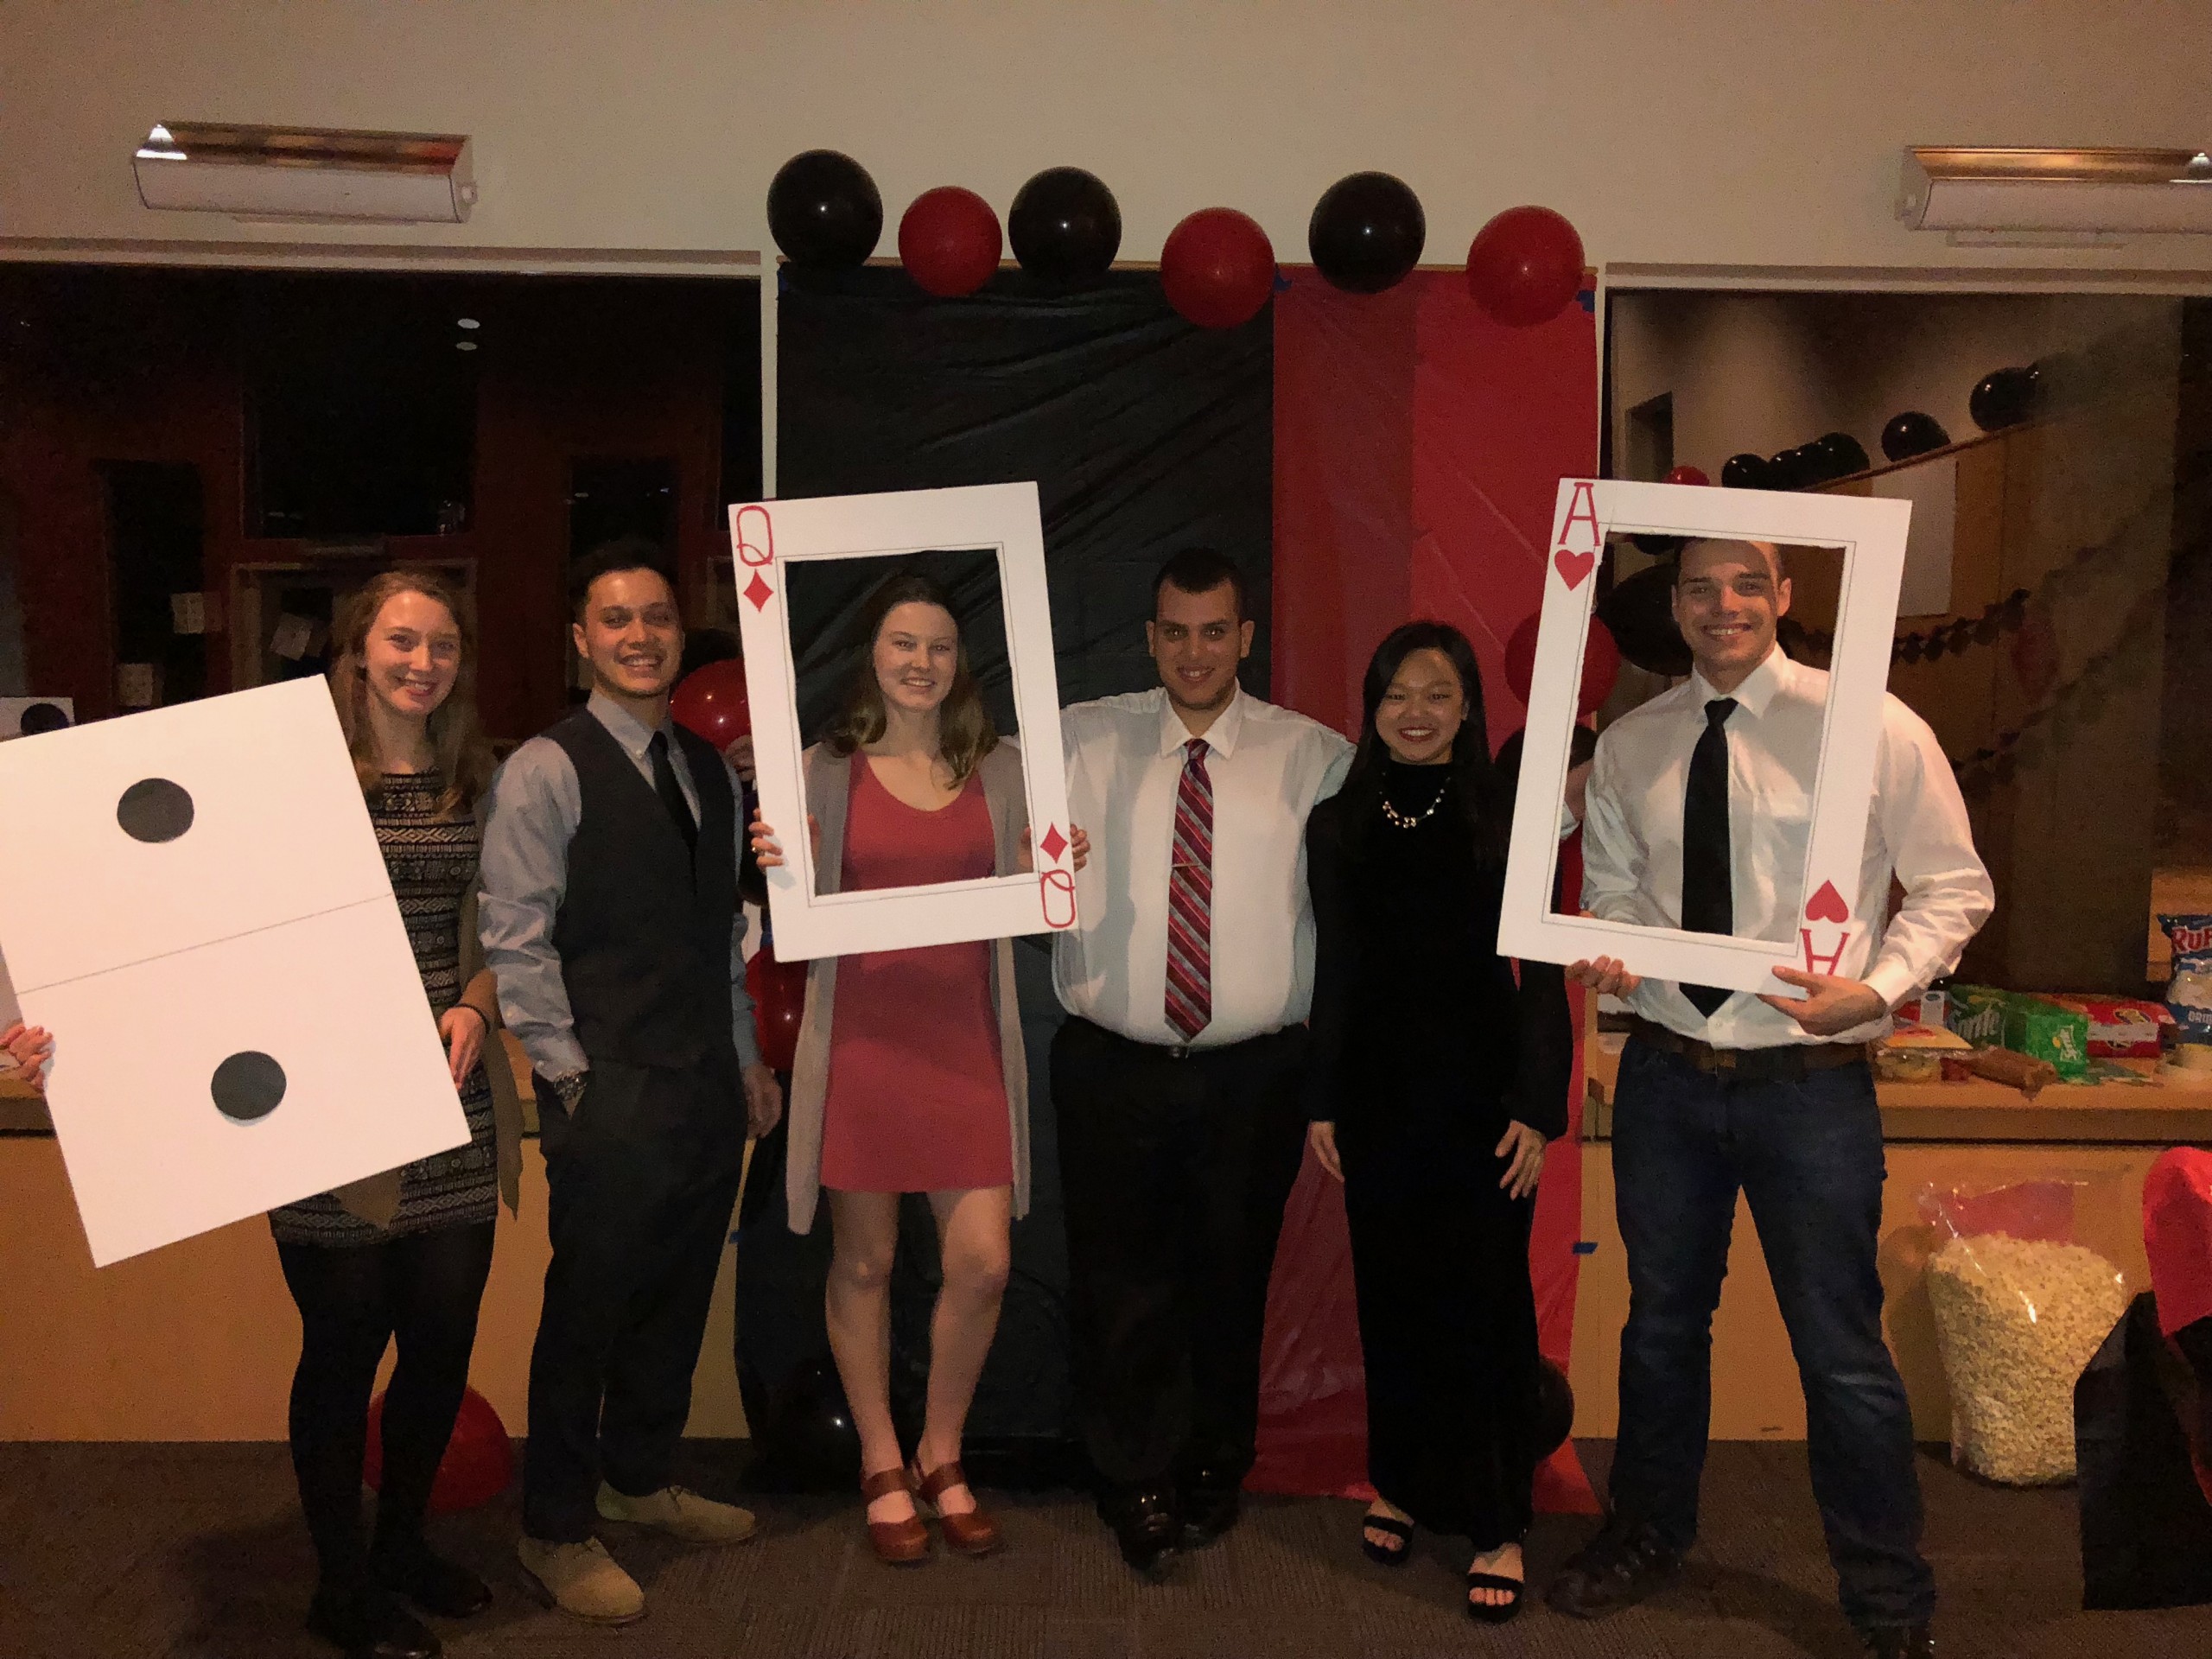 Casino Night, people posing with frames that look like cards